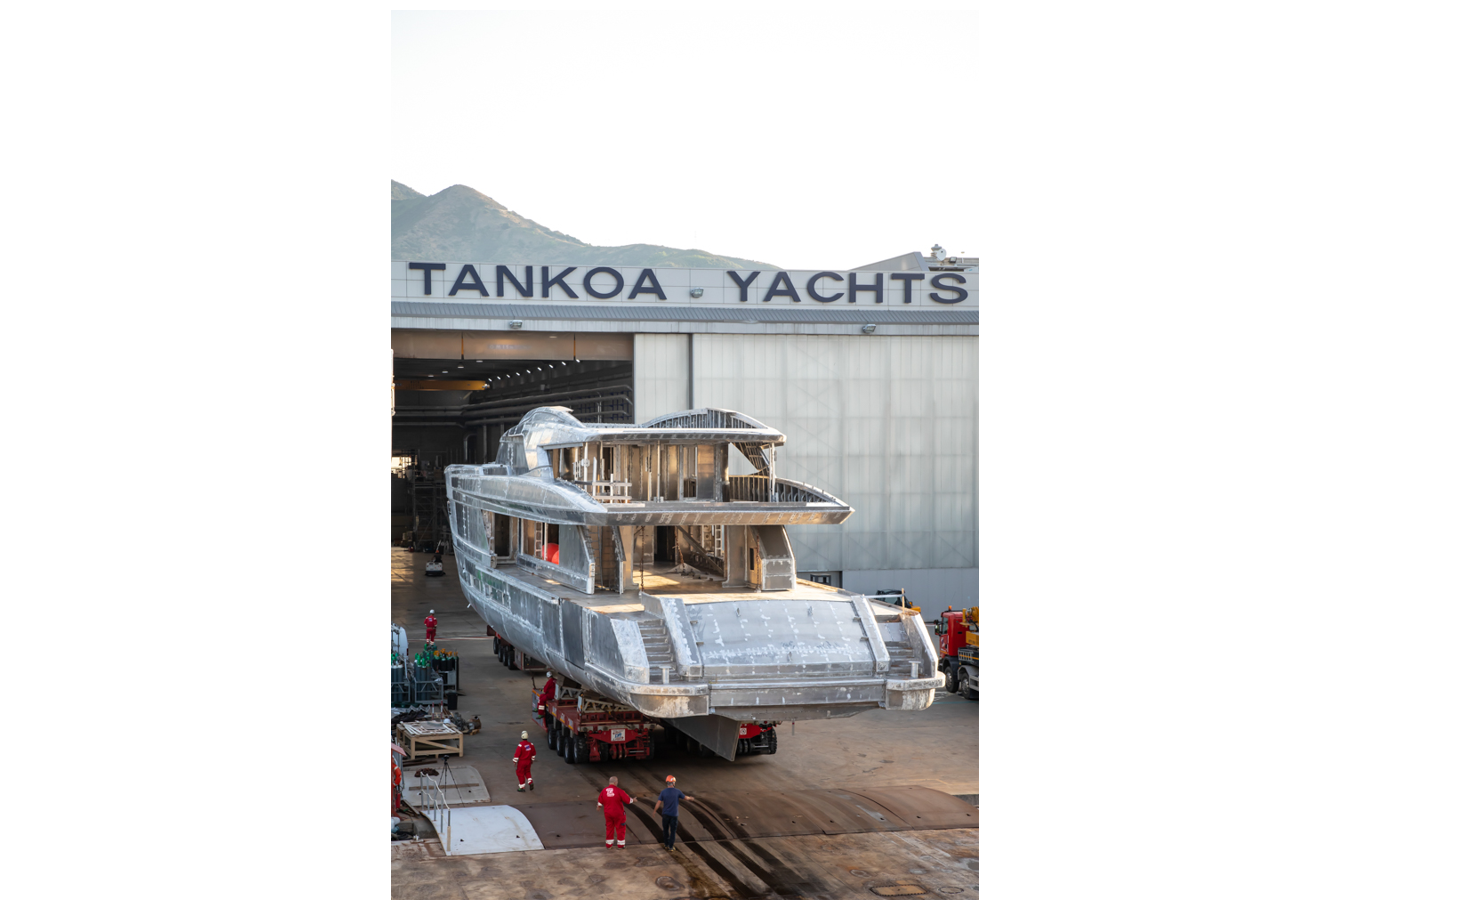 Tankoa 4th all-alluminum 50m hybrid superyacht on schedule for February 2022 delivery